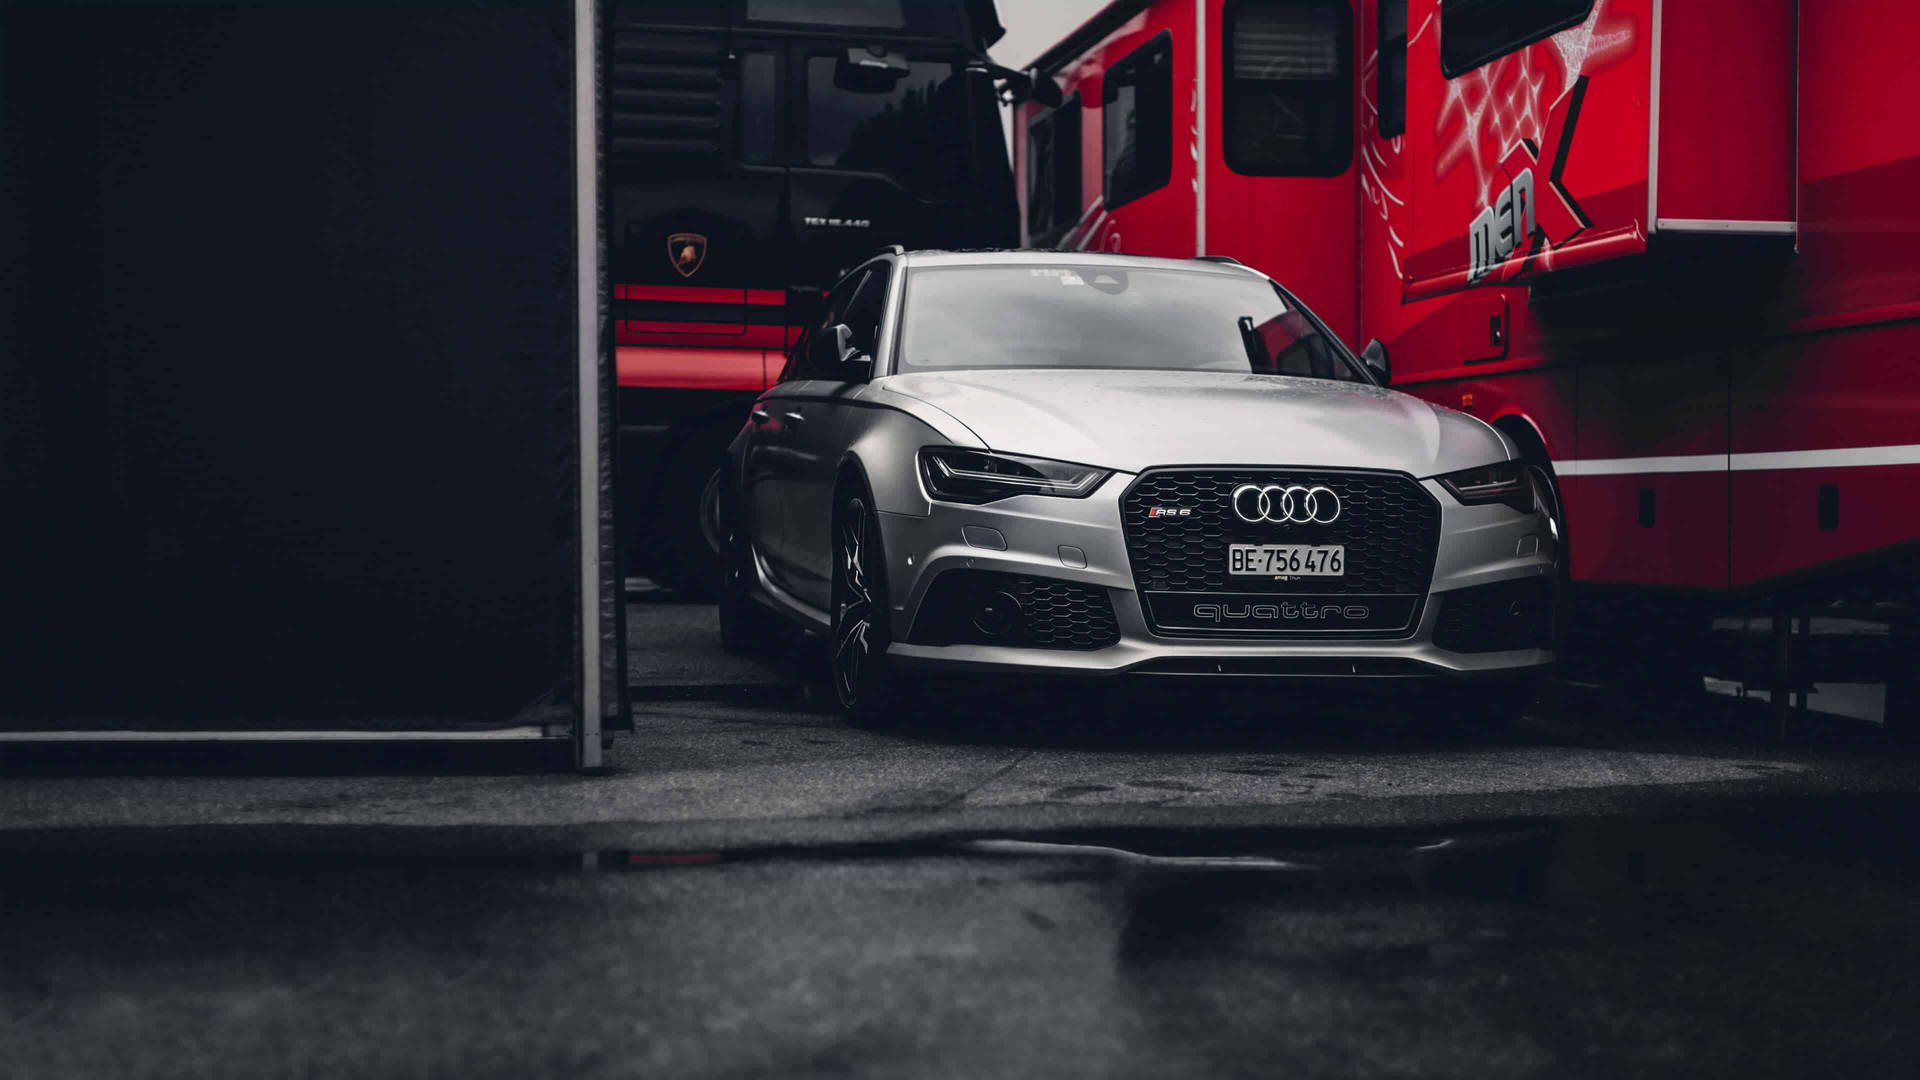 Caption: Stunning Silver Audi RS 6 Unleashed Wallpaper